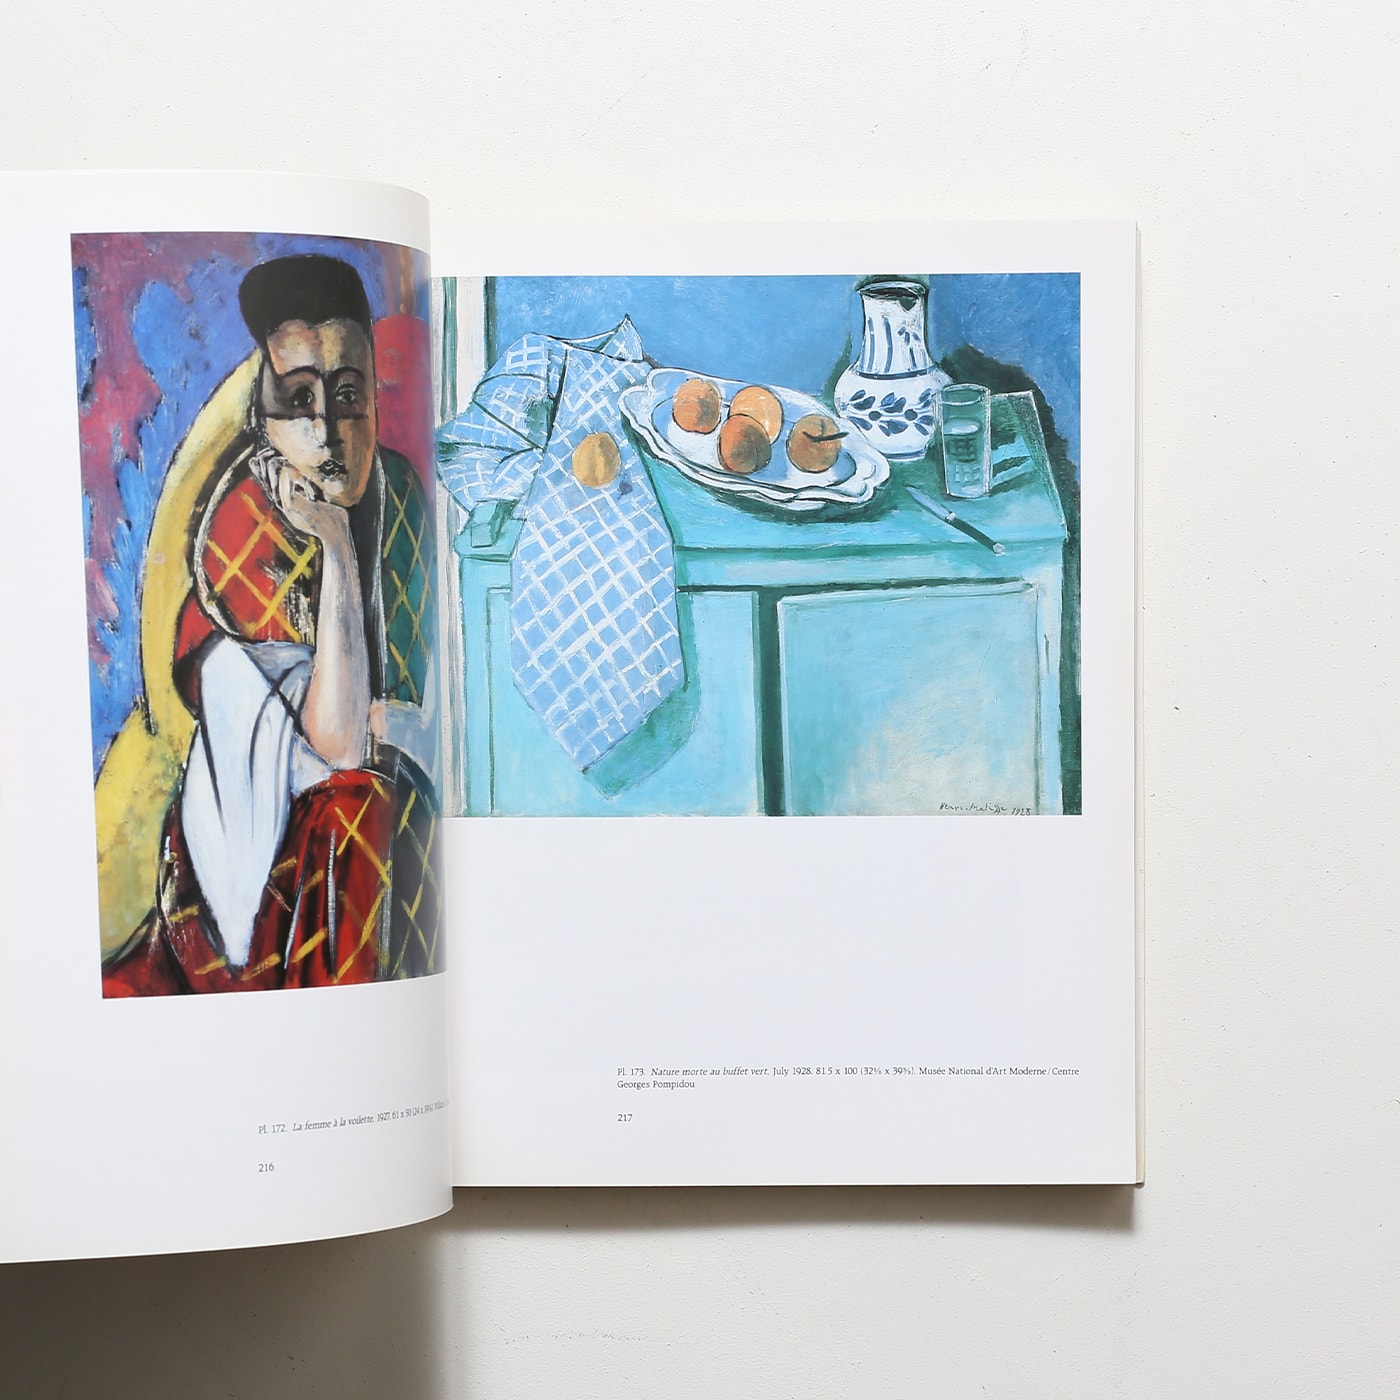 Henri Matisse: The Early Years in Nice 1916-1930